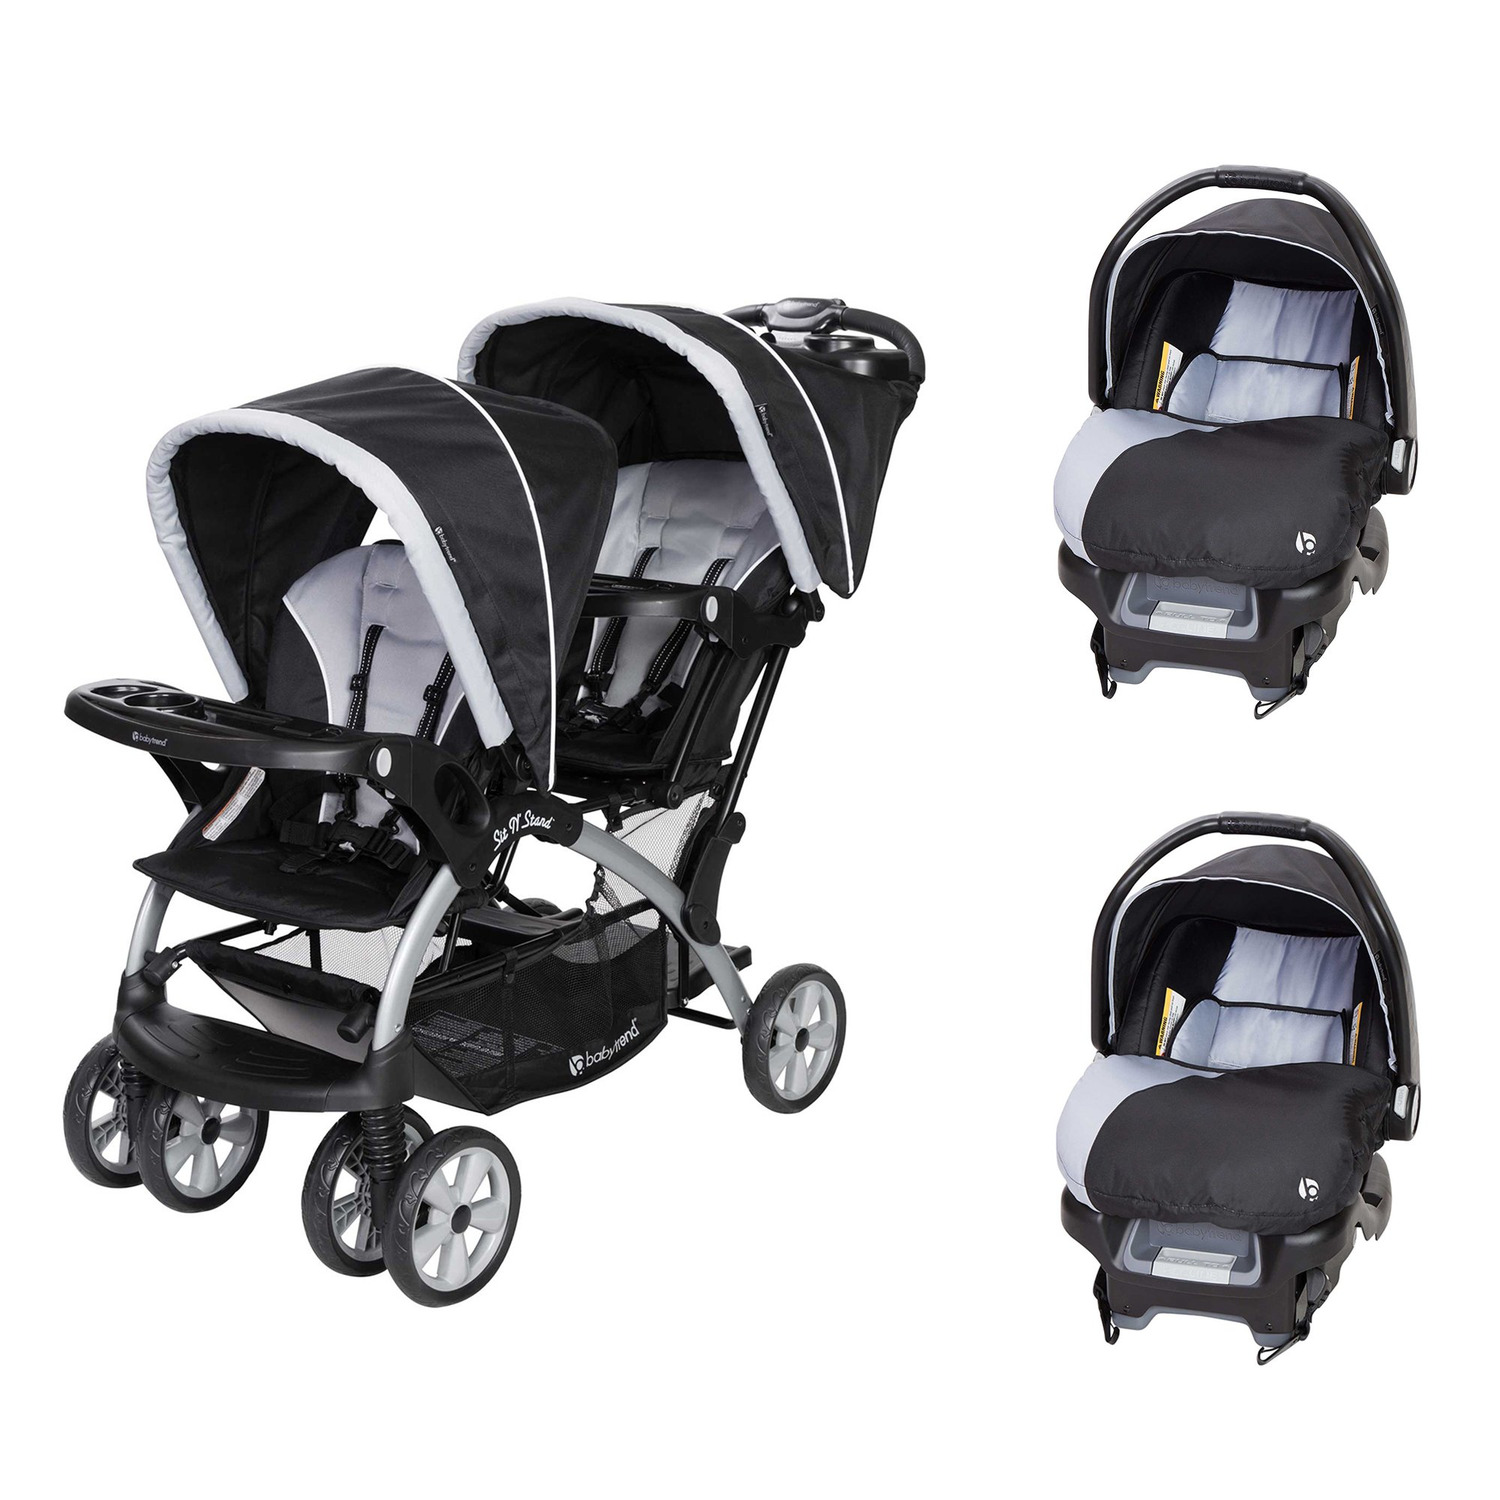 Baby Trend Sit N Stand Tandem Stroller + Car Seats (2) Travel System, Stormy HOT DEAL AT WALMART!